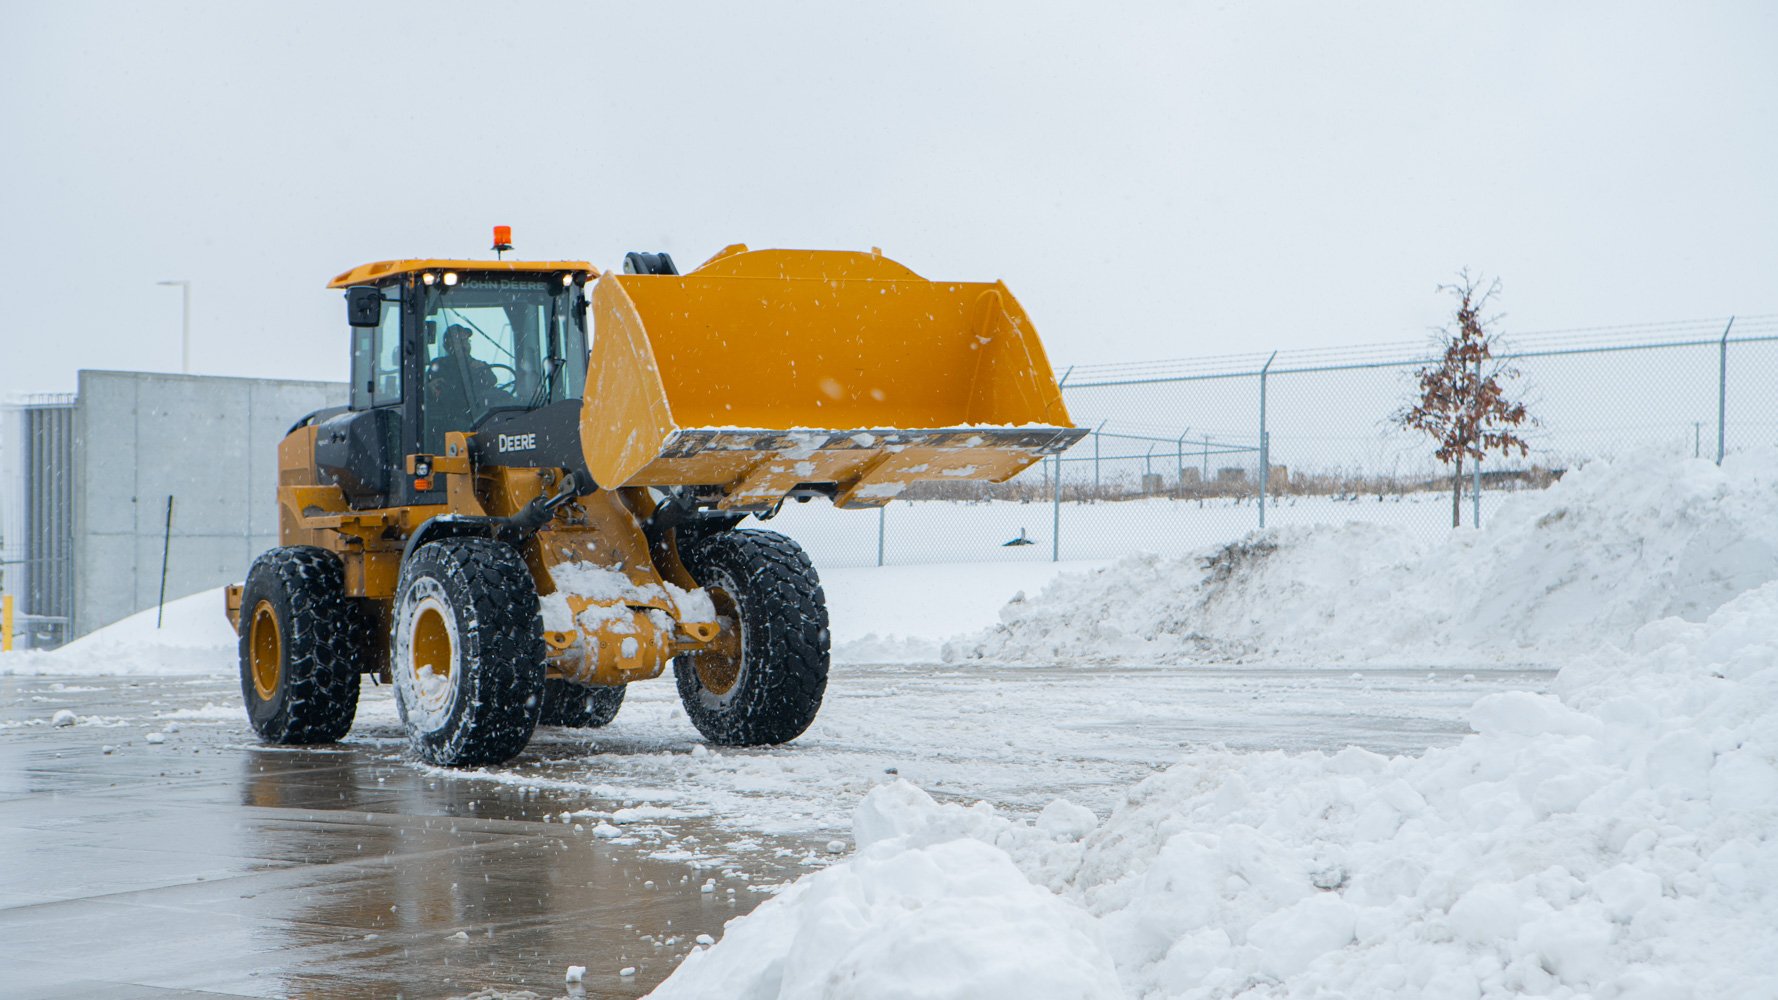 plow loader moving large piles of snow on a commercial facility parking lot